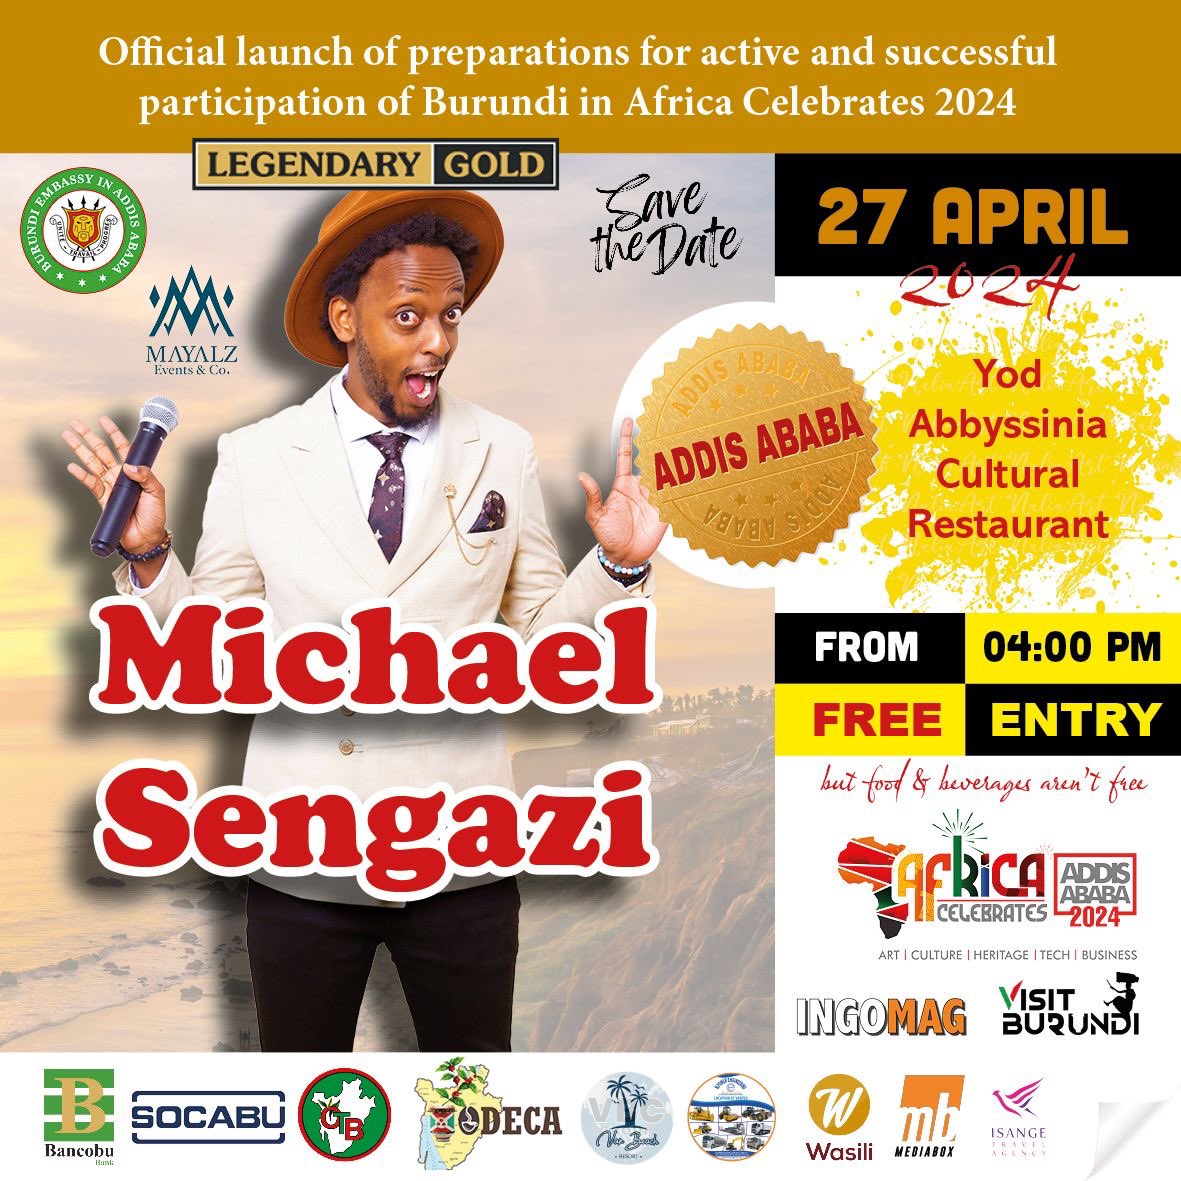 Everything has a starting point,and Burundi is kicking off its journey towards a successful participation in #Africacelebrates with a laughter-filled evening! Join us at the vibrant Yod Abyssinia Cultural Restaurant in Addis 🇪🇹on 27April 2024 from 4Pm for a special comedy show